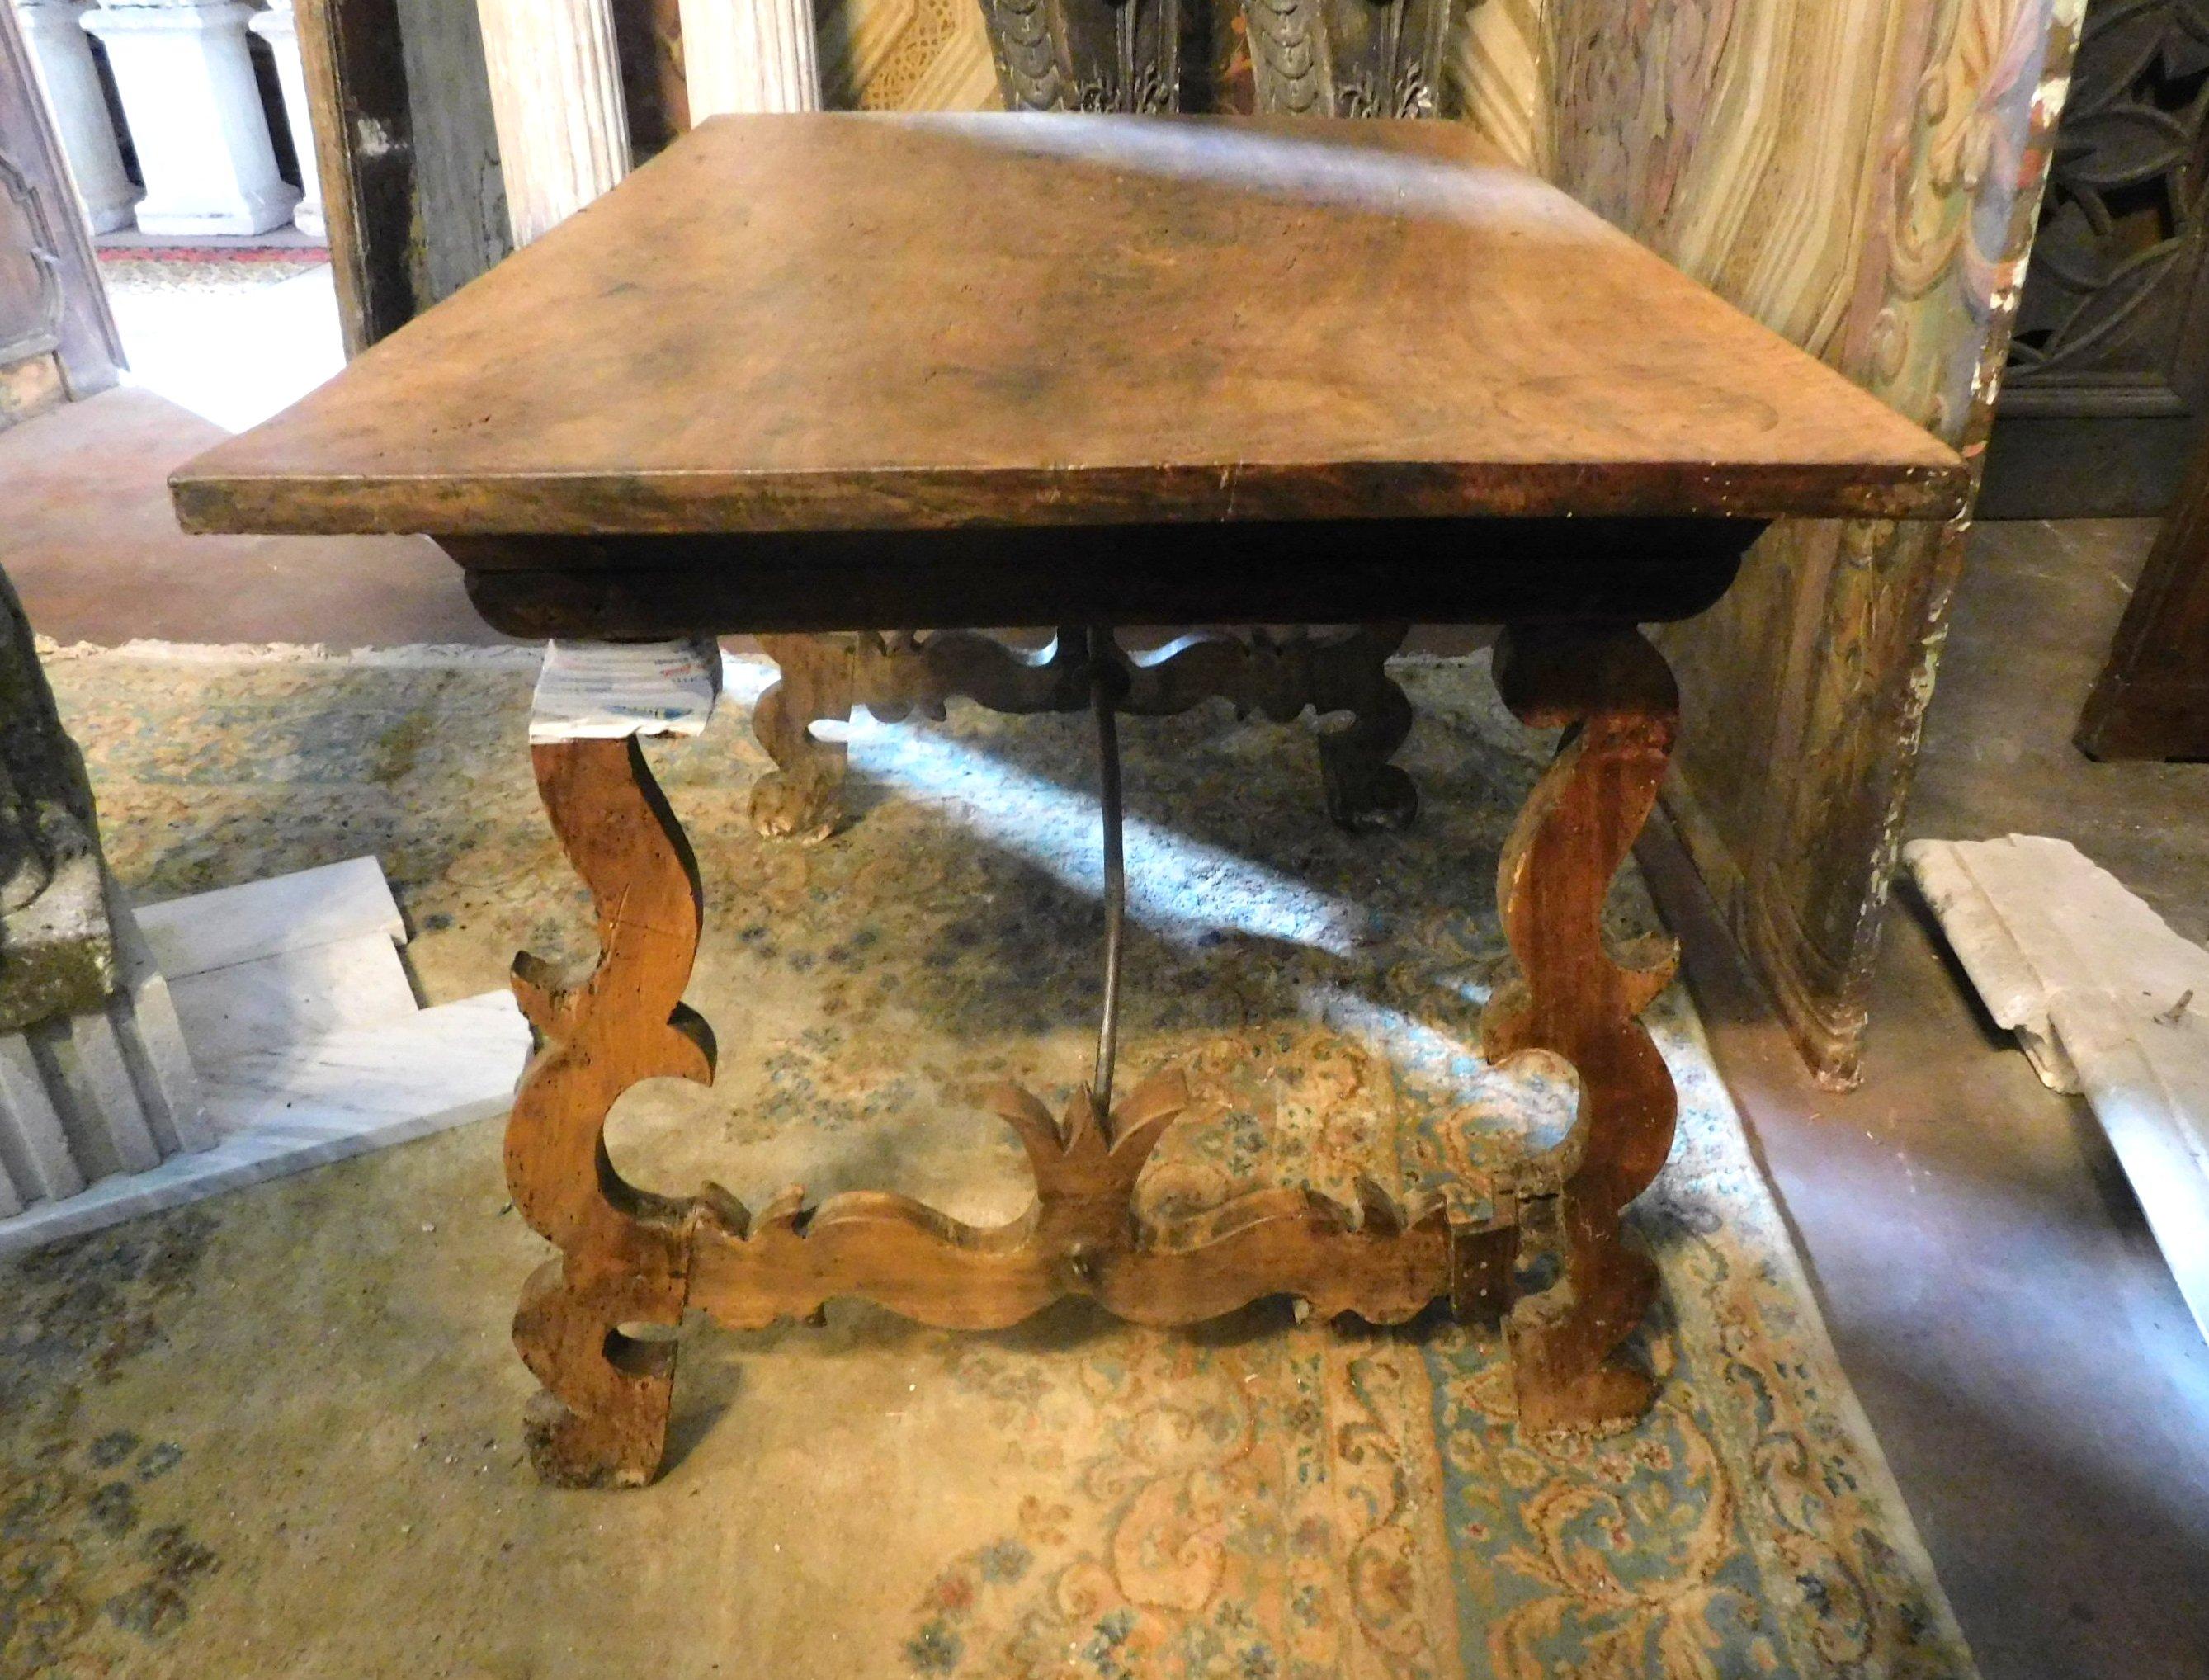 Hand-Carved Antique Brown Walnut Table, Wavy Legs and Single Plank, 1700, Italy